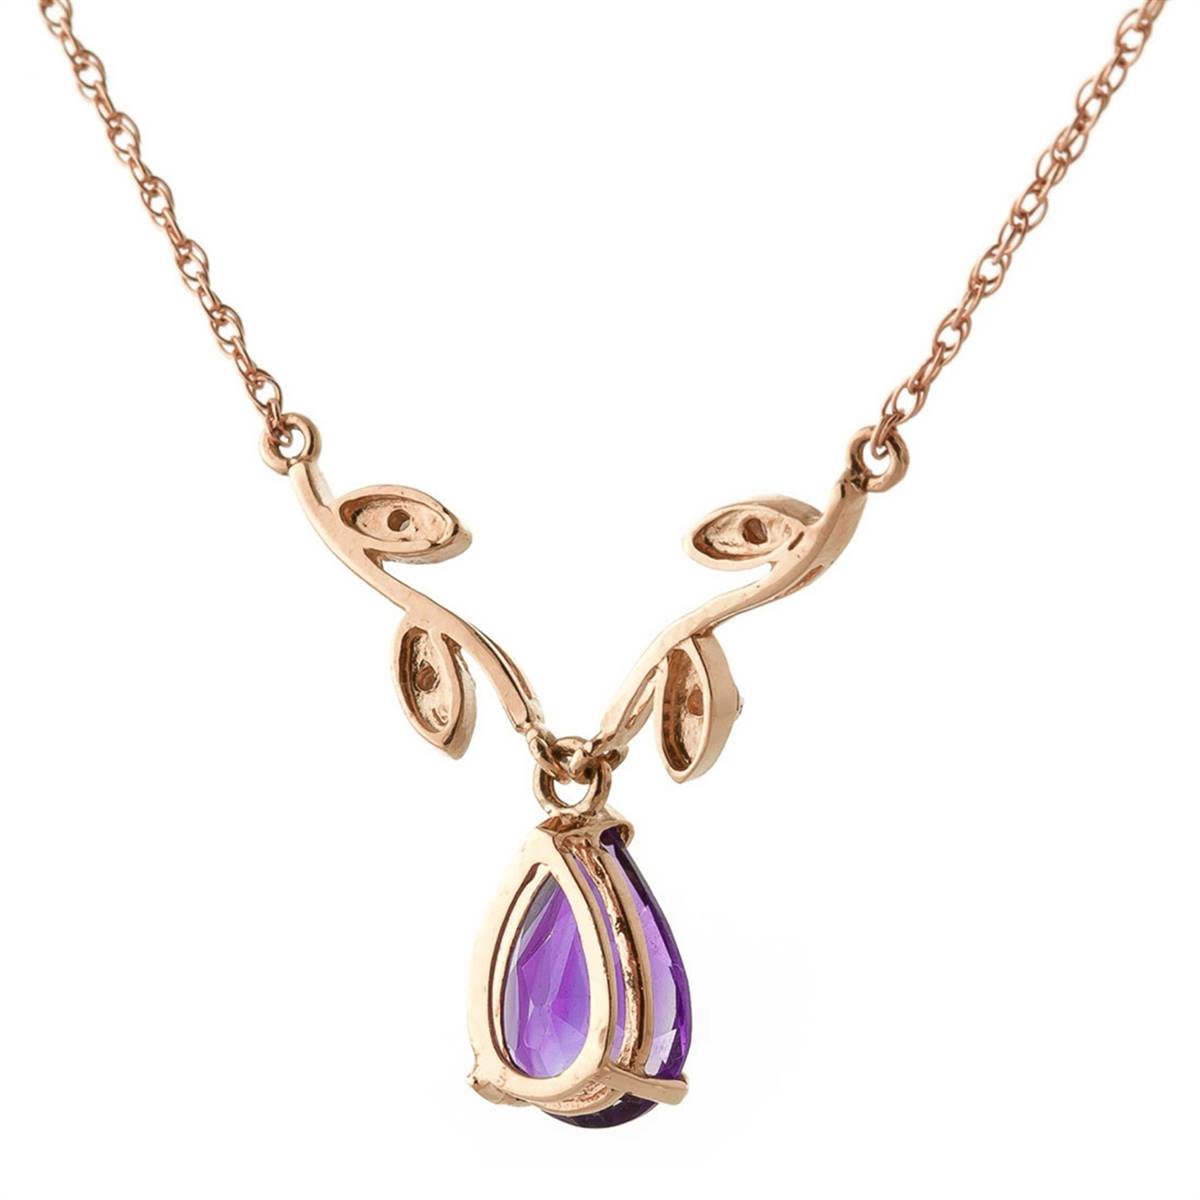 14K Solid Rose Gold Necklace w/ Natural Diamonds & Purple Amethyst